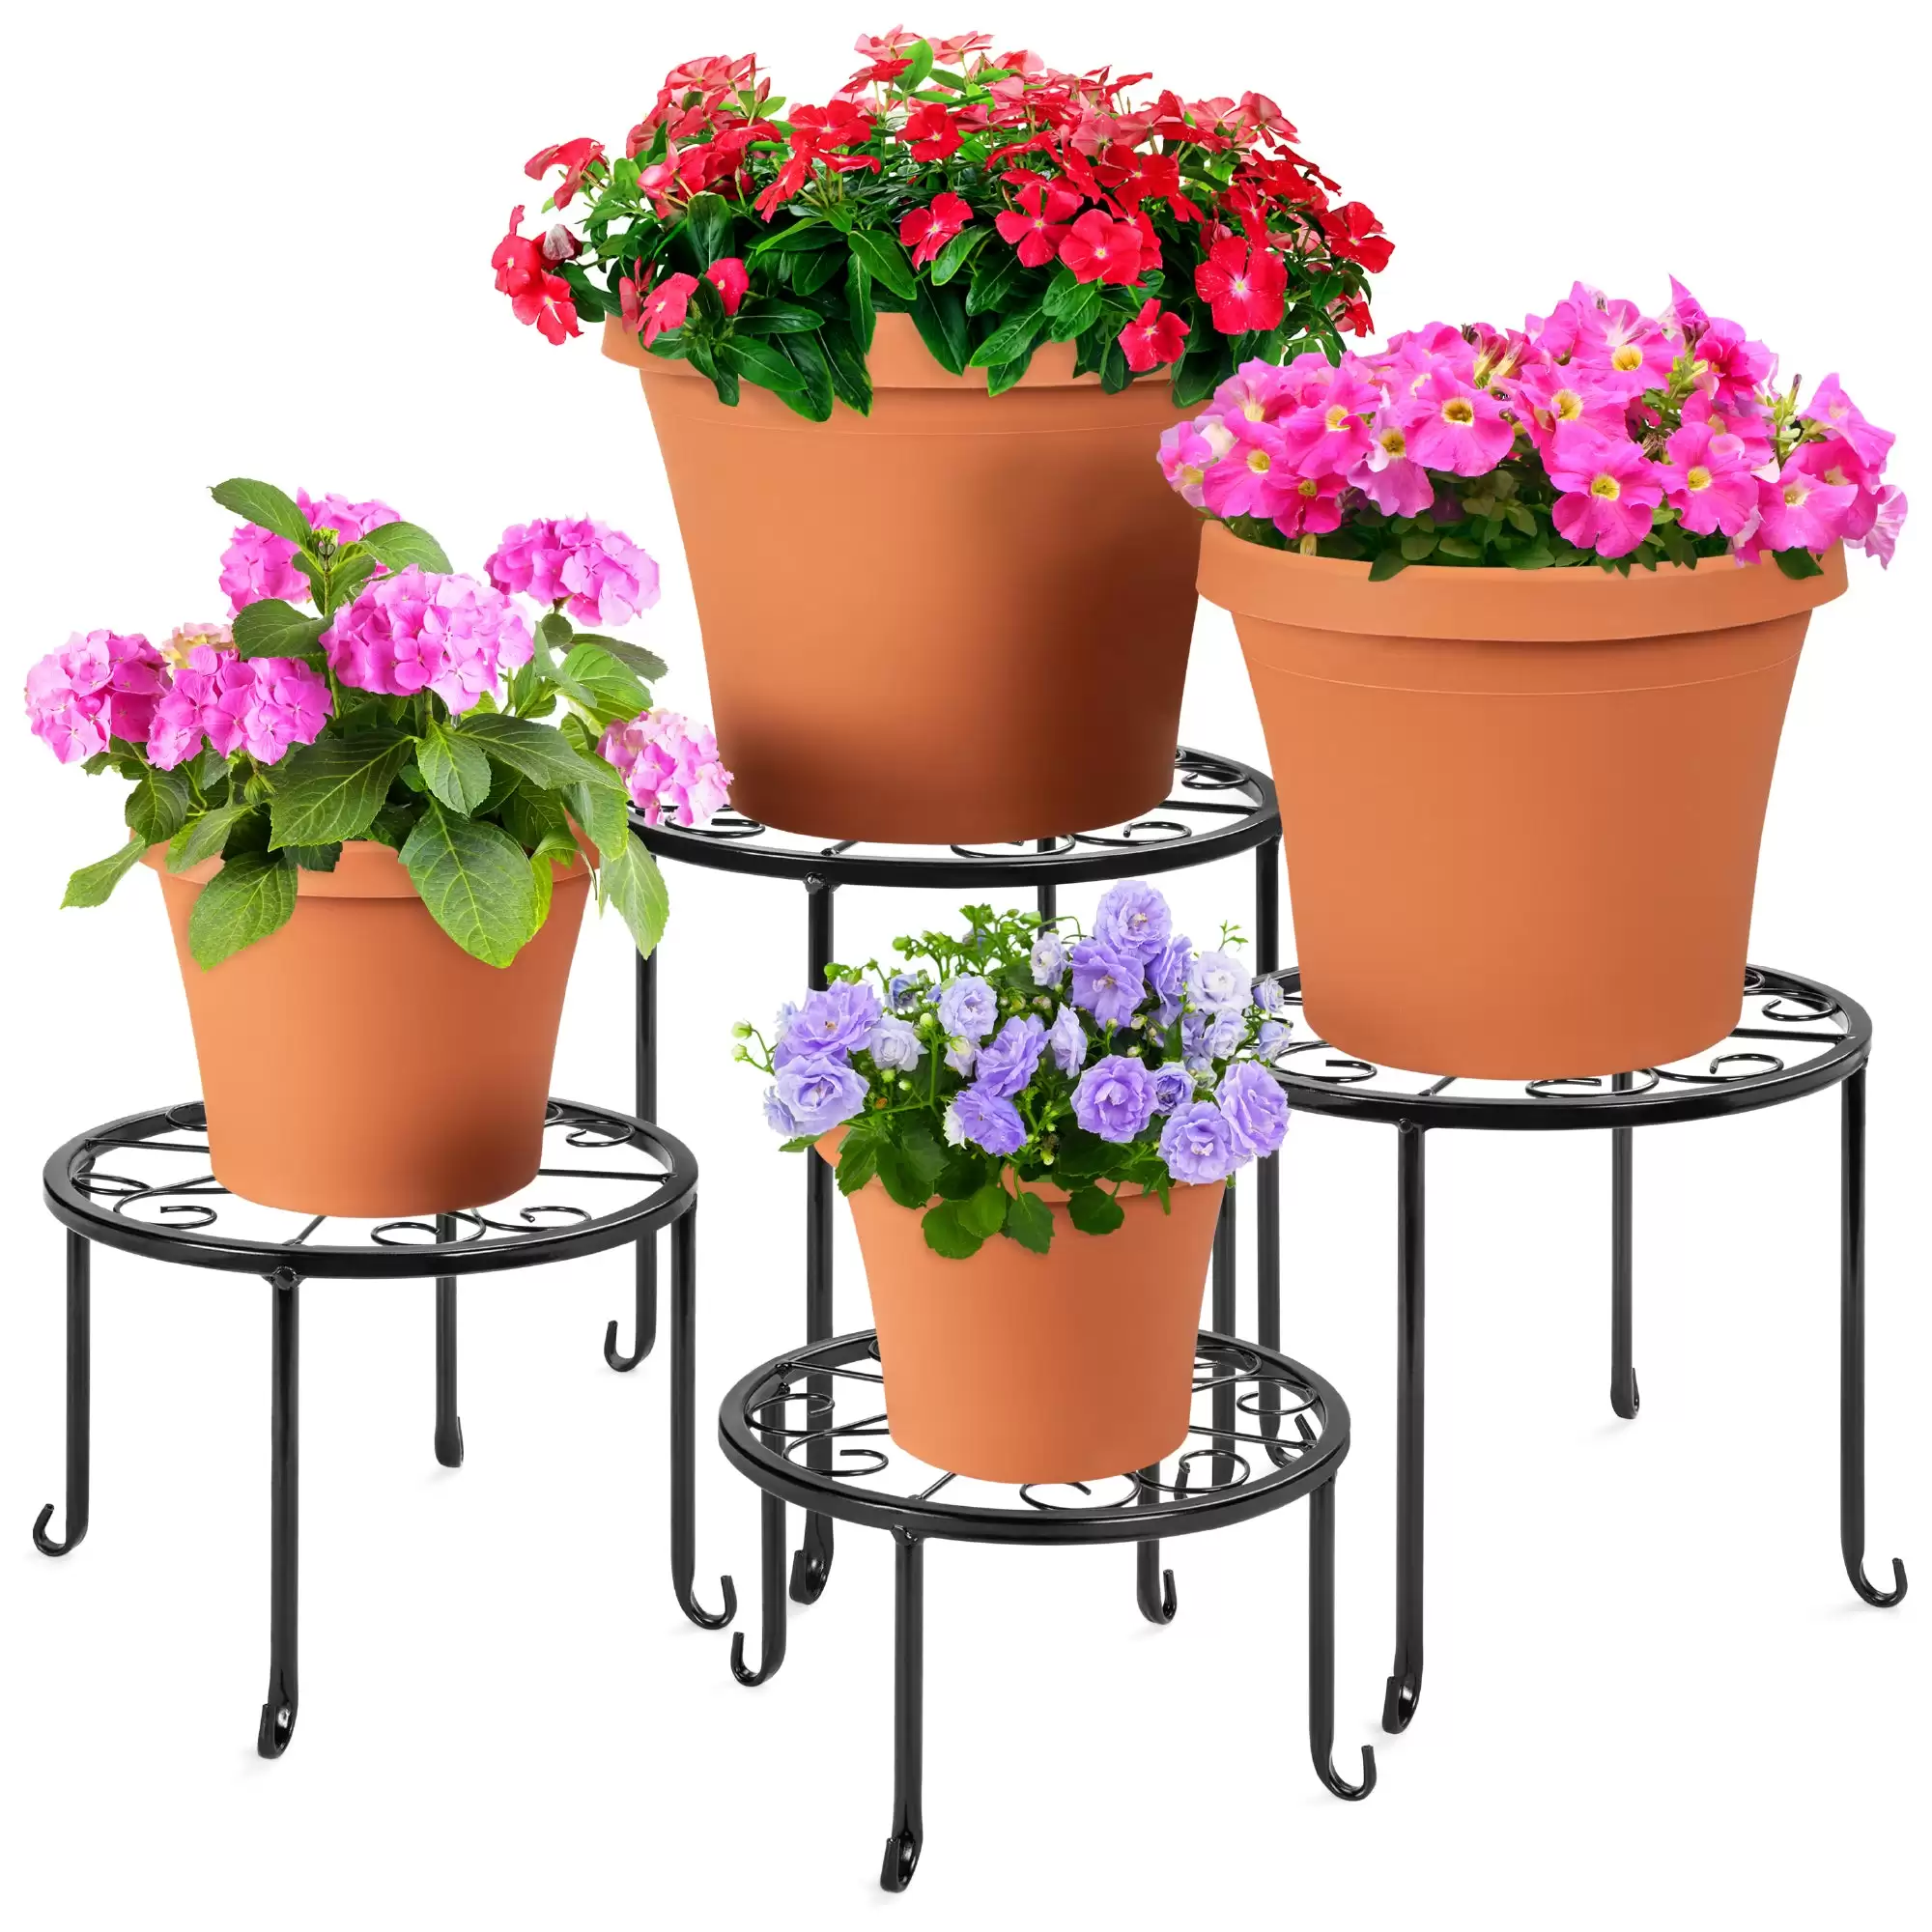 Get $34.79 Set Of 4 Indoor Outdoor Metal Nesting Plant Stands, Flowerpot Holders At Bestchoiceproducts